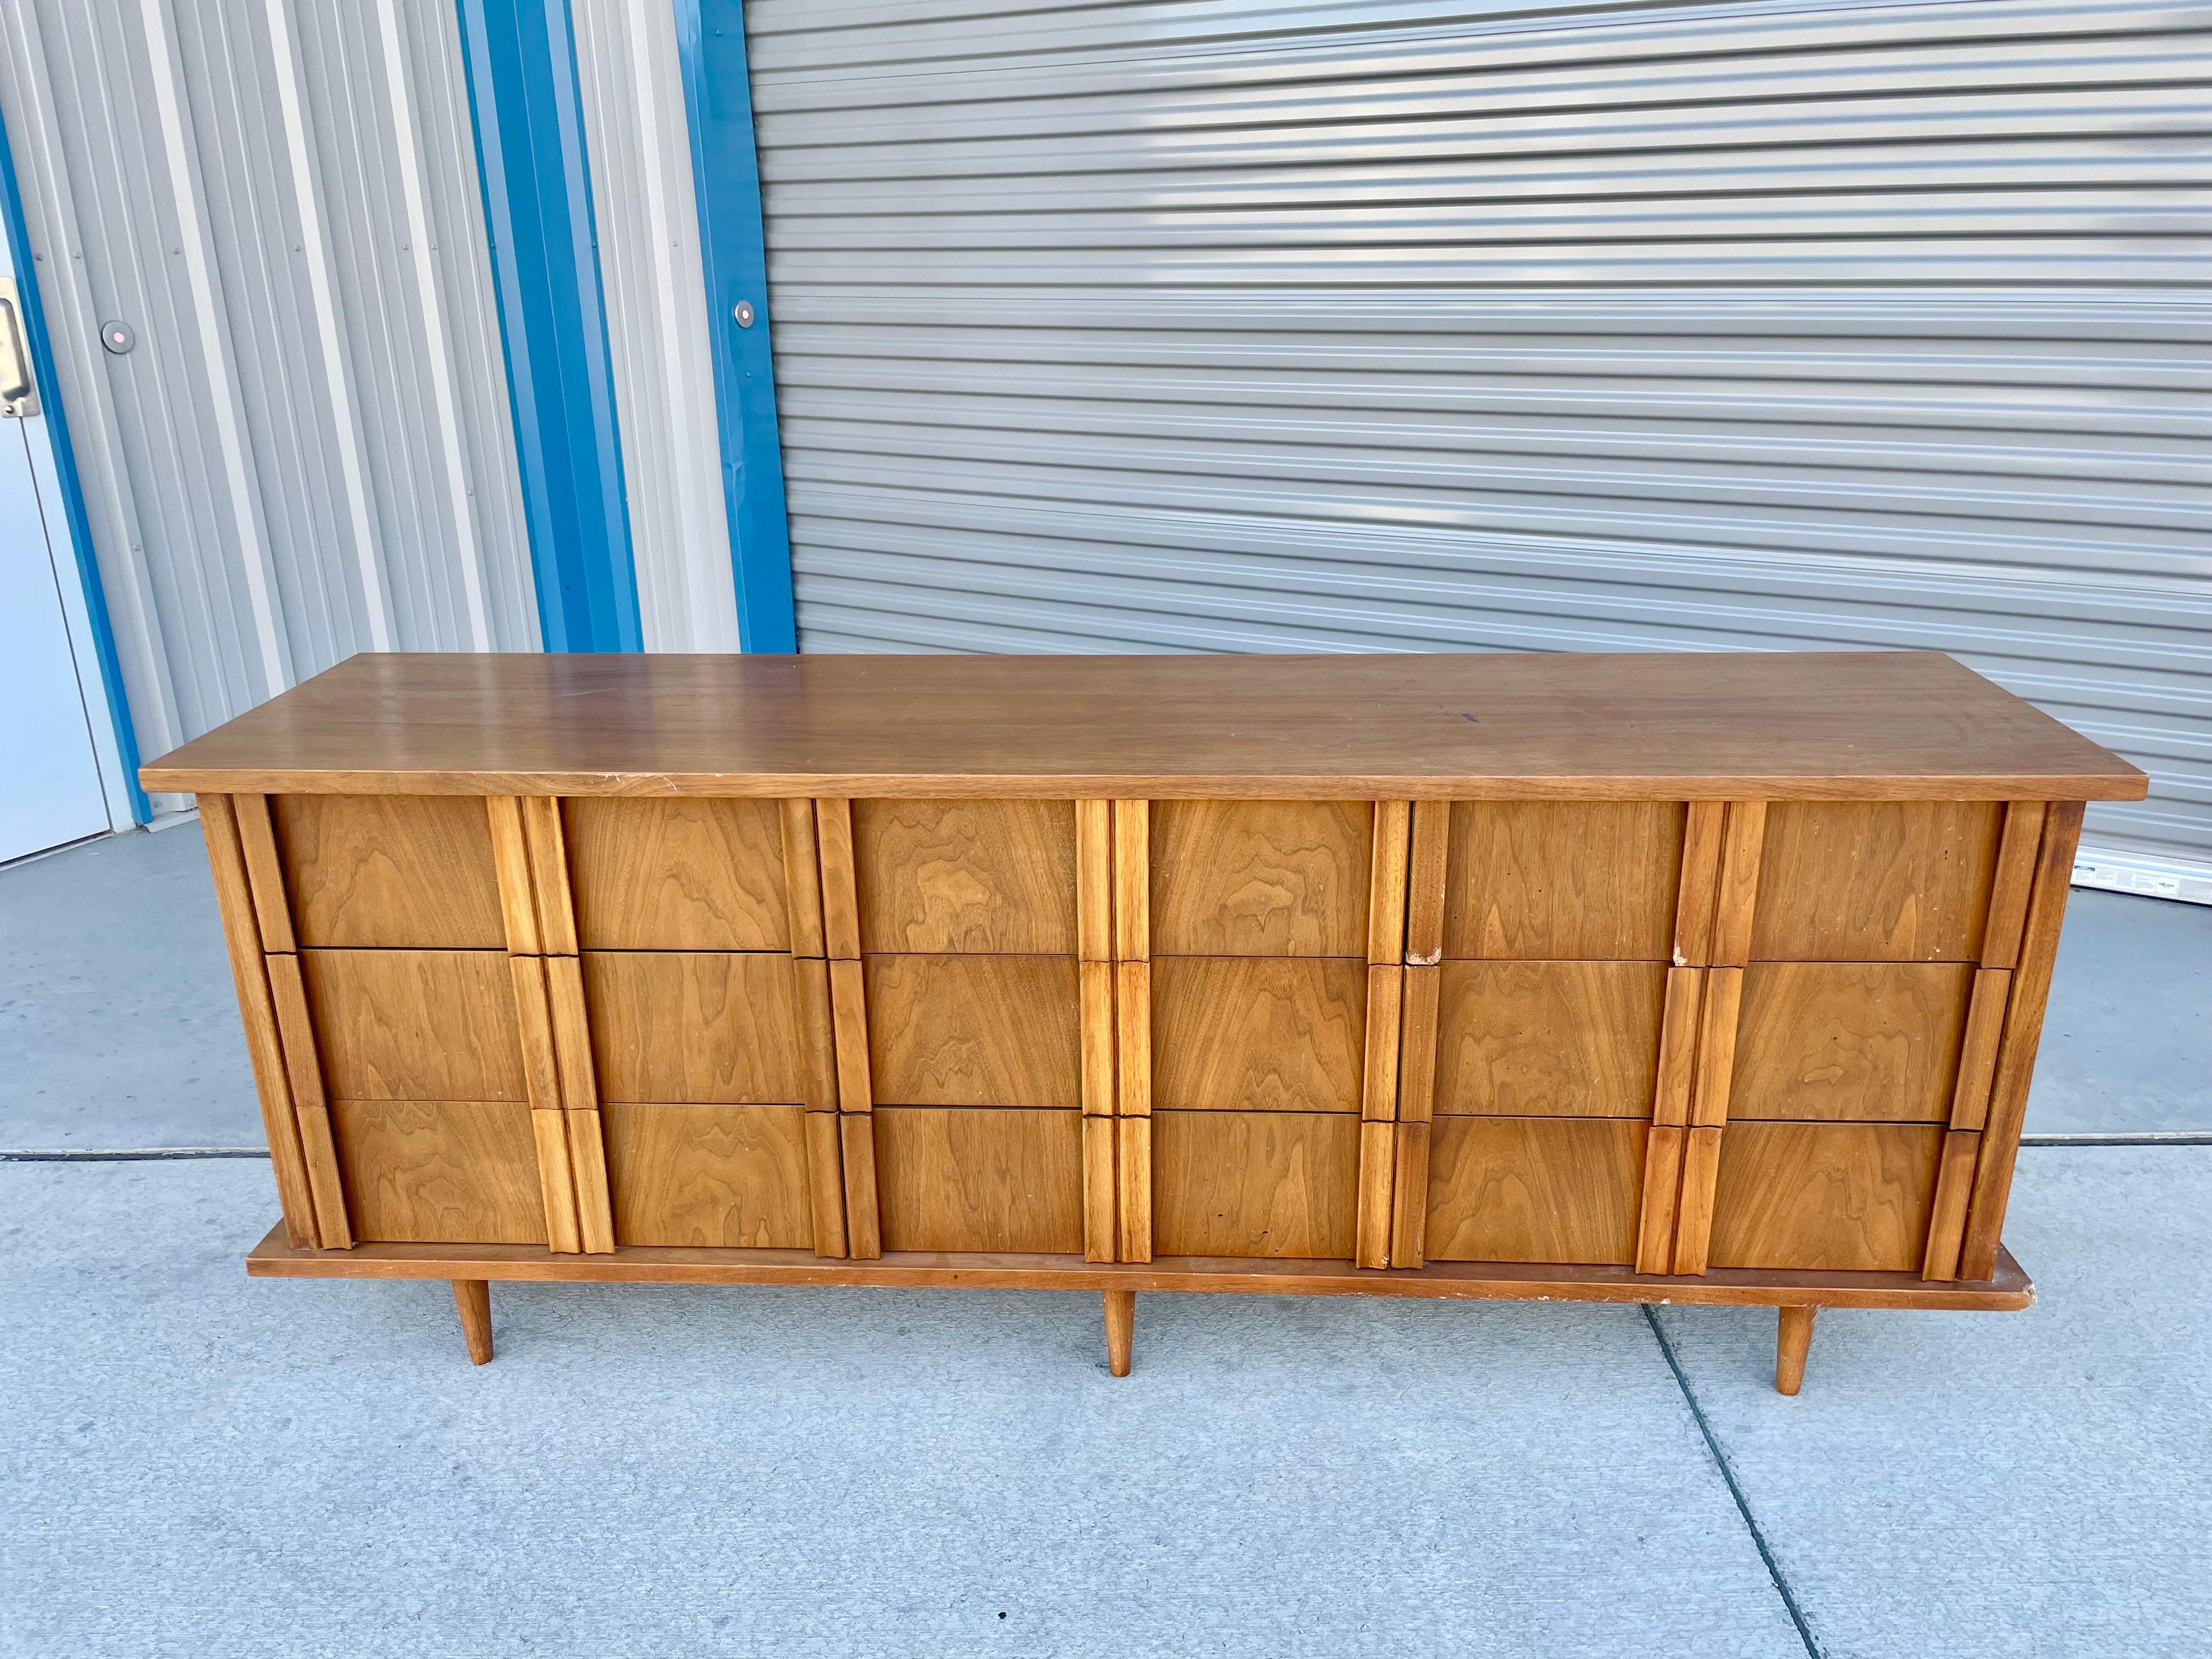 Mid-century walnut dresser designed and manufactured by American of Martinville circa 1960s. This beautiful dresser features a walnut frame with nine pull-out drawers. Each drawer comes with a walnut sculptured handle, giving it a unique design to